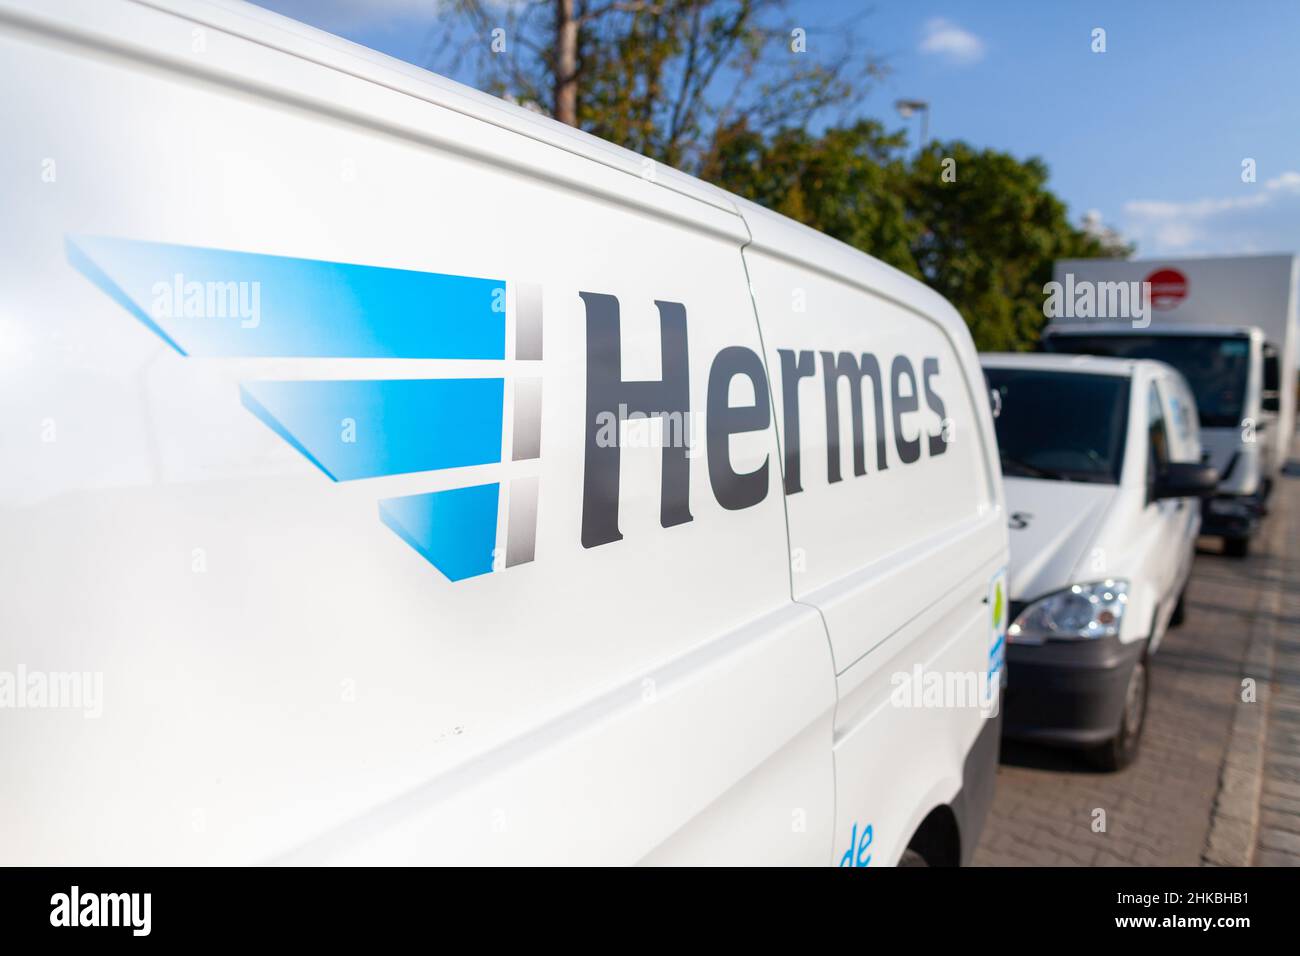 Nuernberg, Germany - August 4, 2019: Hermes branch on a Mercedes Benz delivery truck. Stock Photo